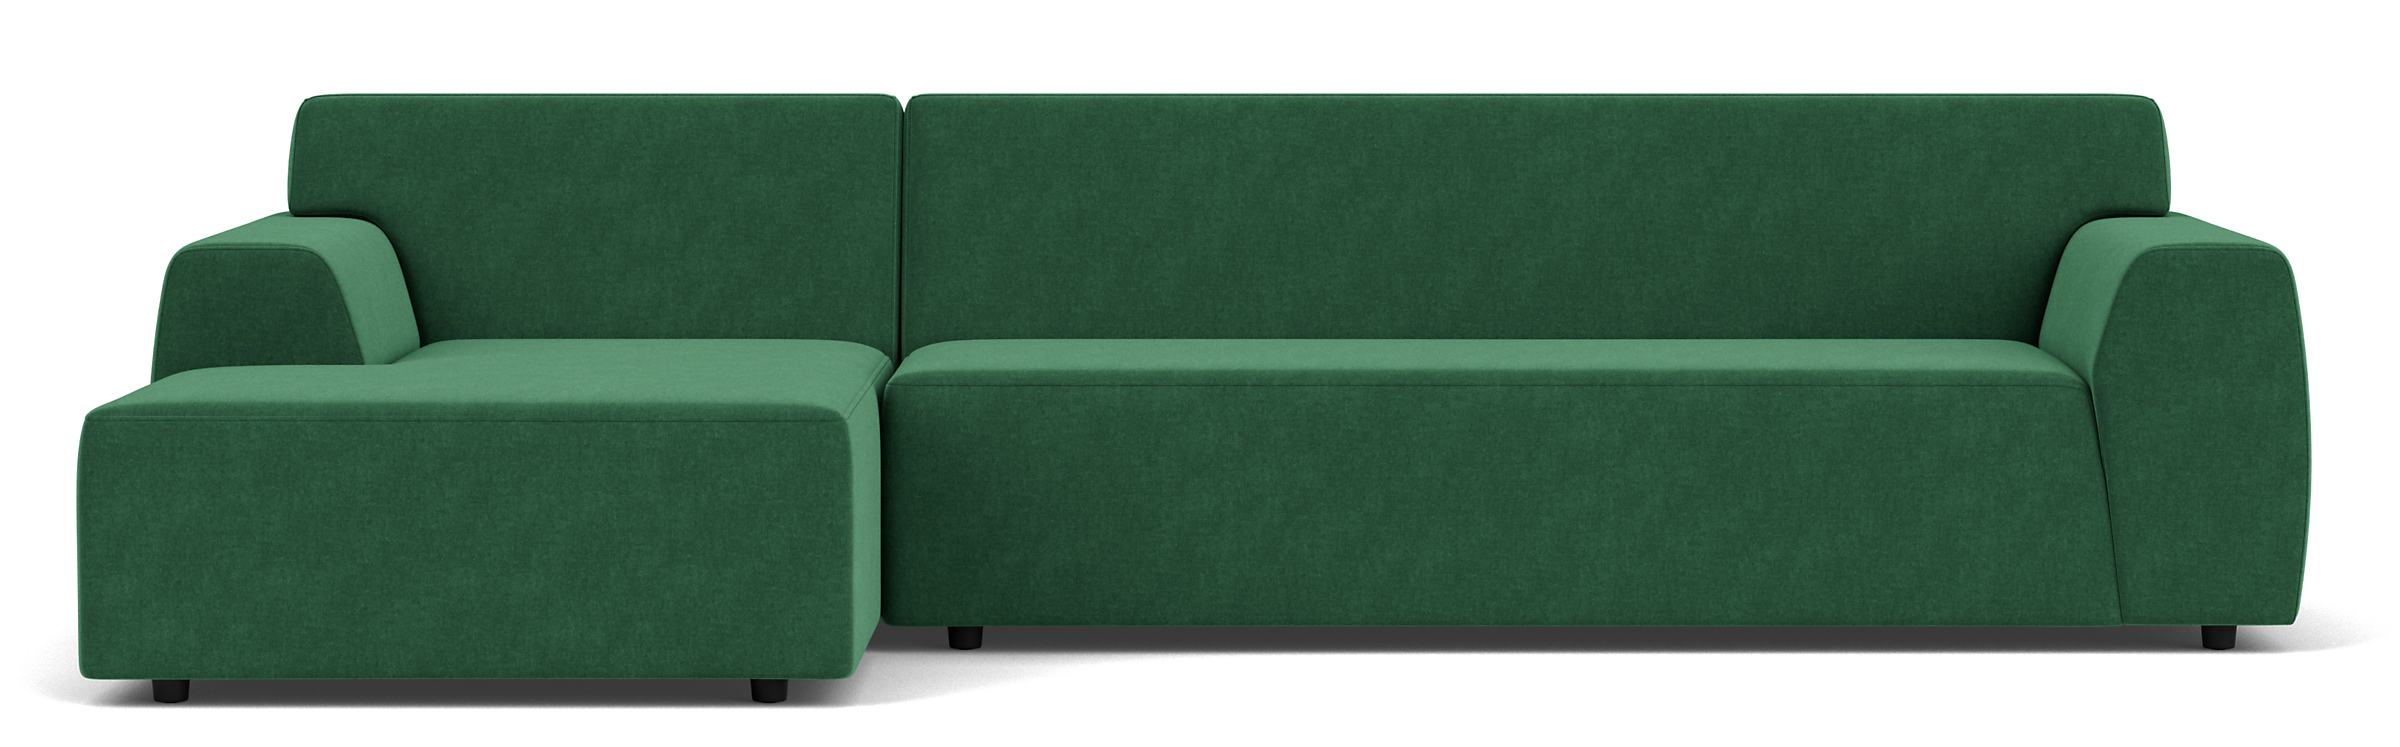 Linville 118" Sofa w/Left-Arm Chaise in Vance Emerald